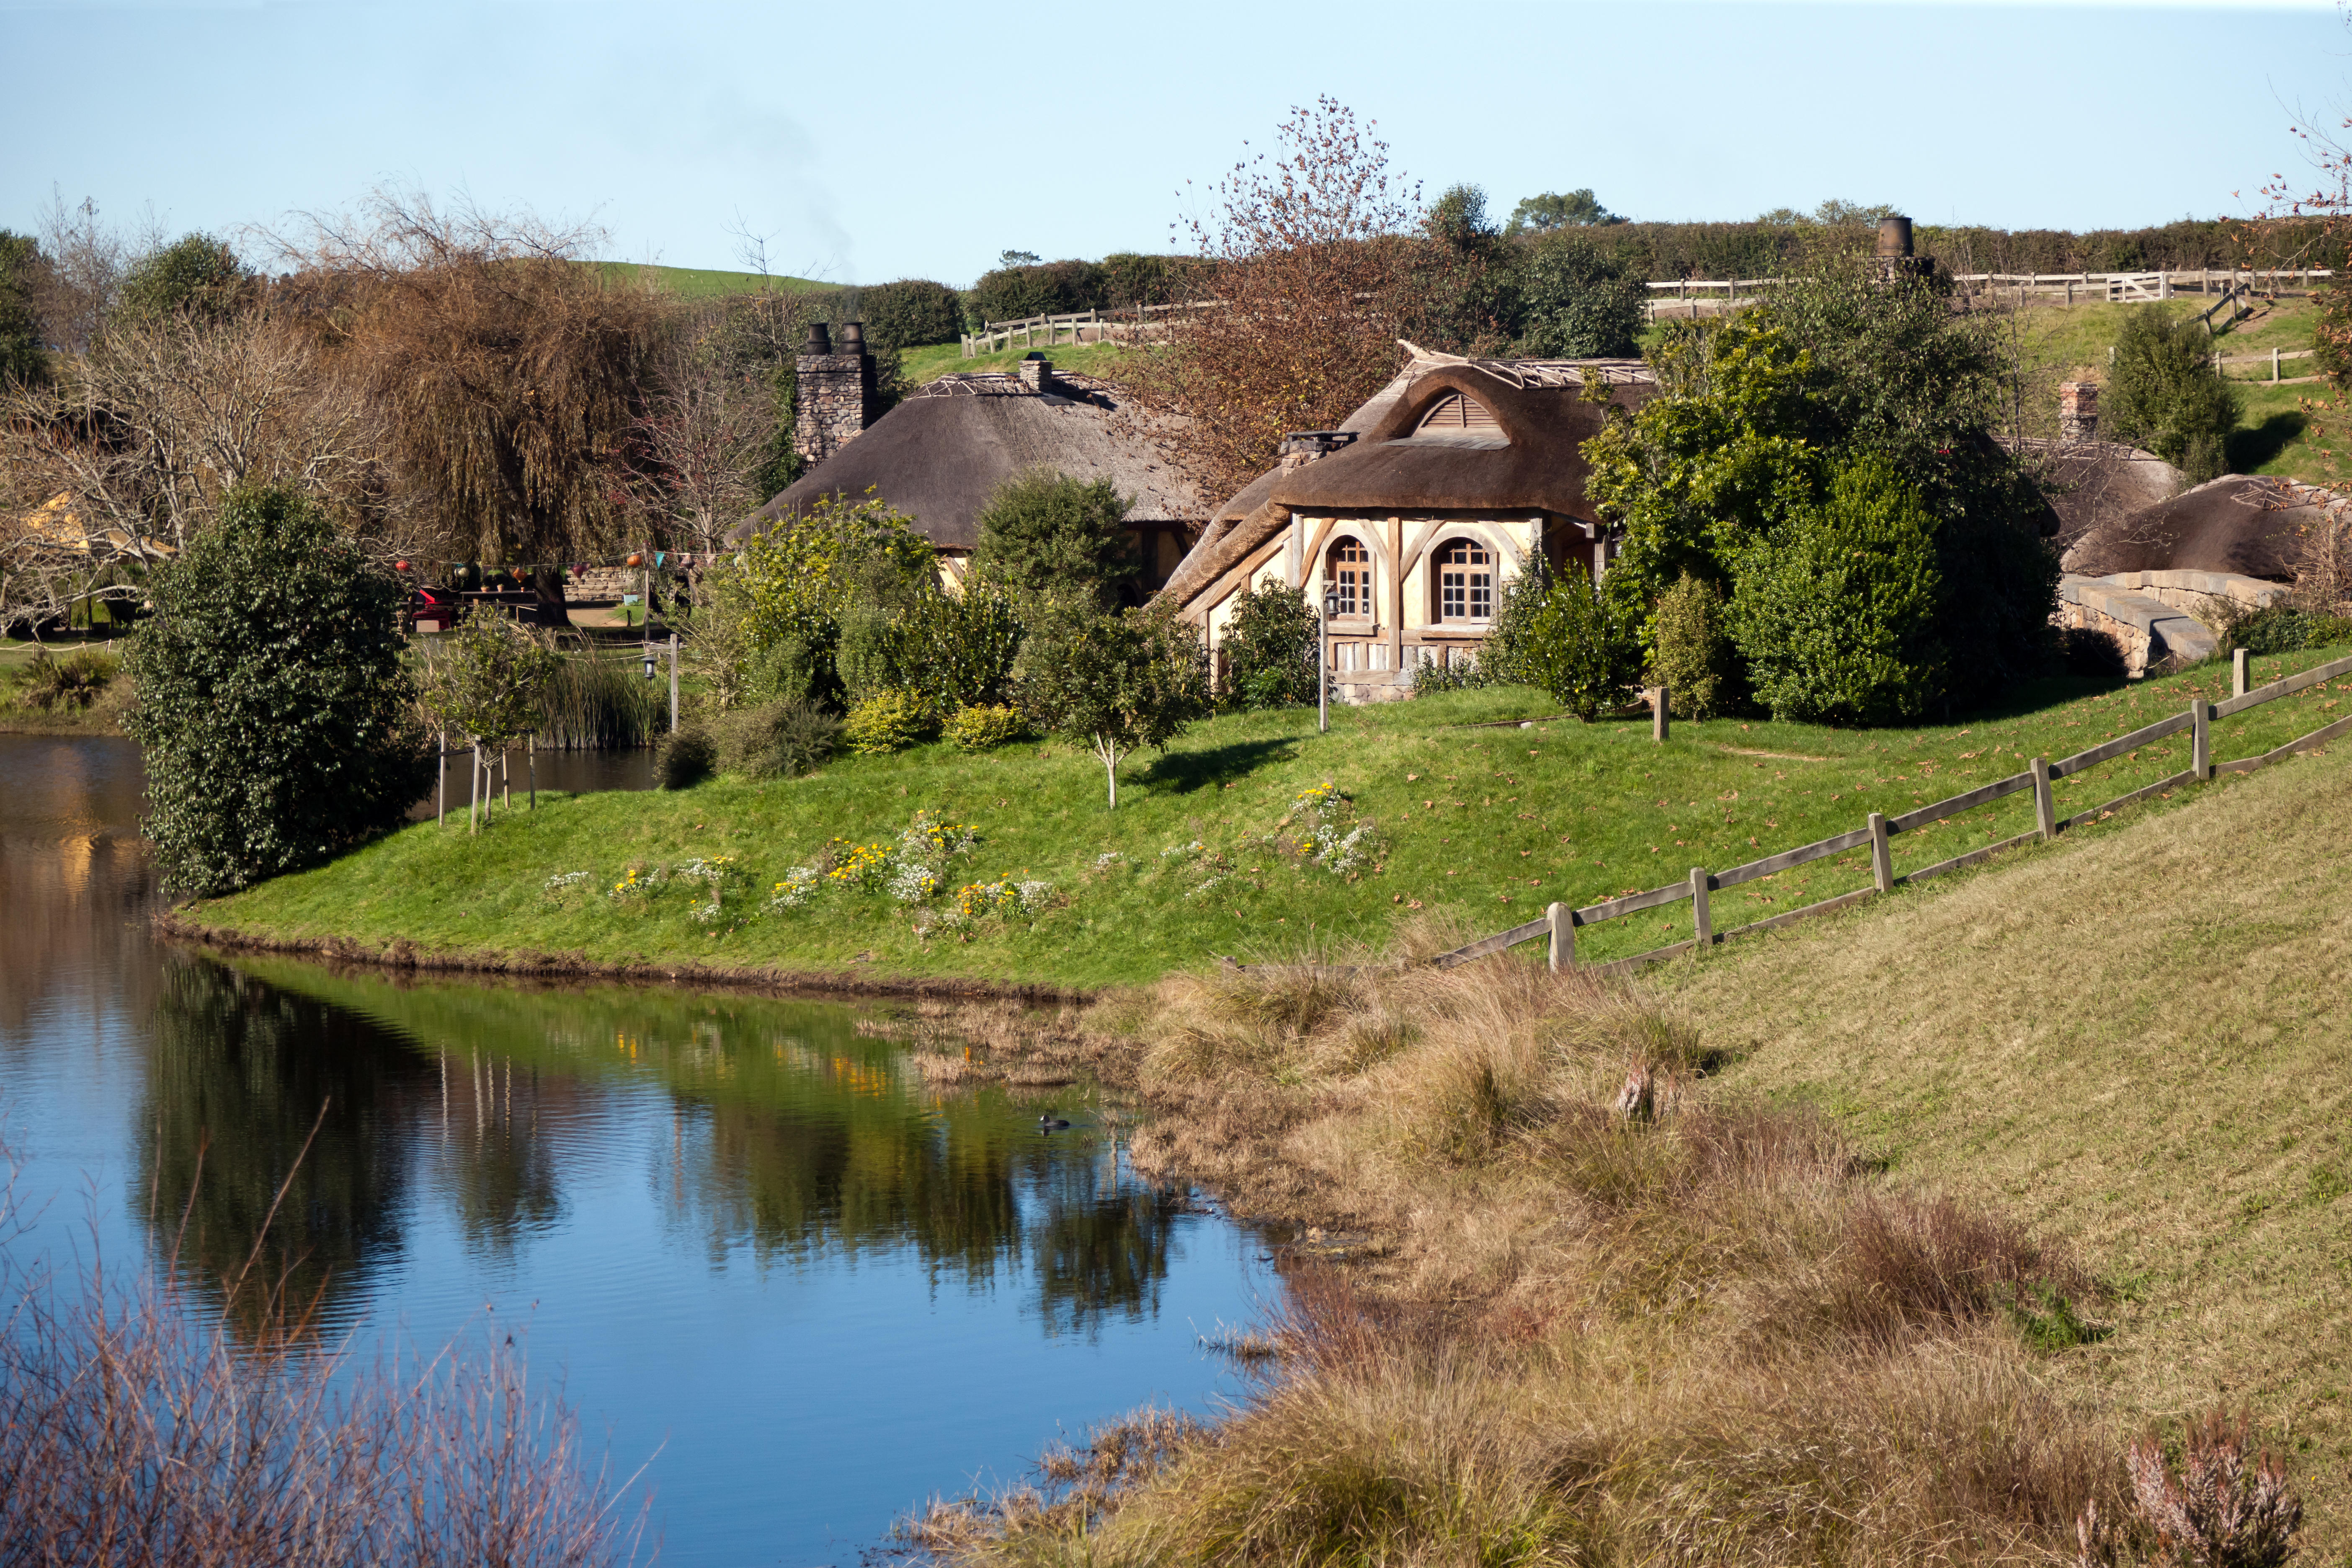 Hobbiton has become a tourist attraction in New Zealand